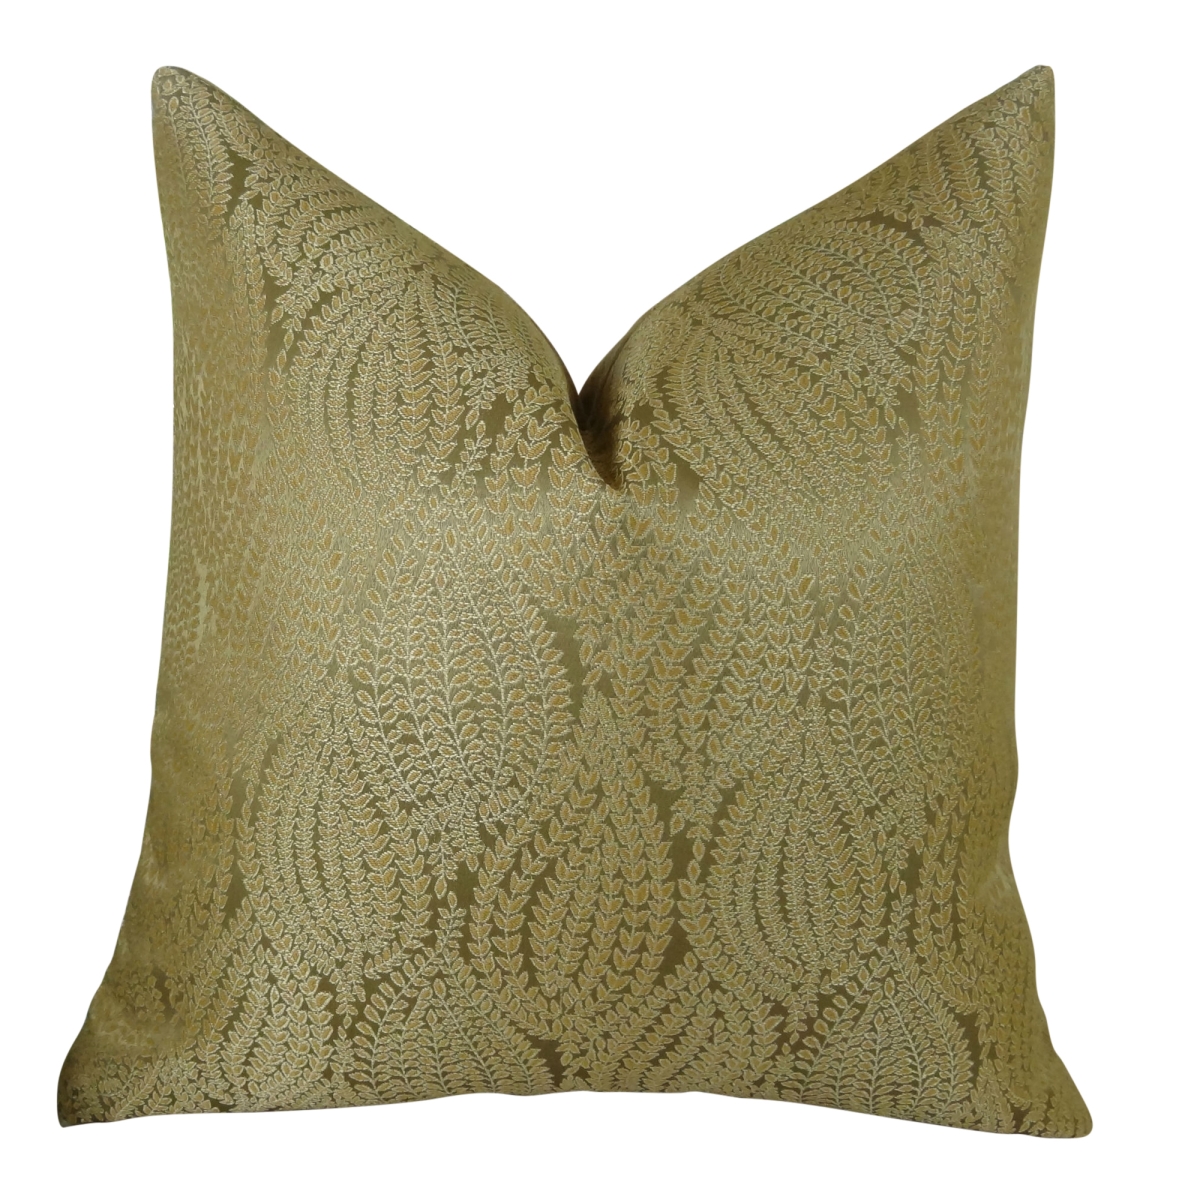 Pb11015-2026-dp 20 X 26 In. Double Sided Standard Size Leaf Pod Handmade Throw Pillow - Gold